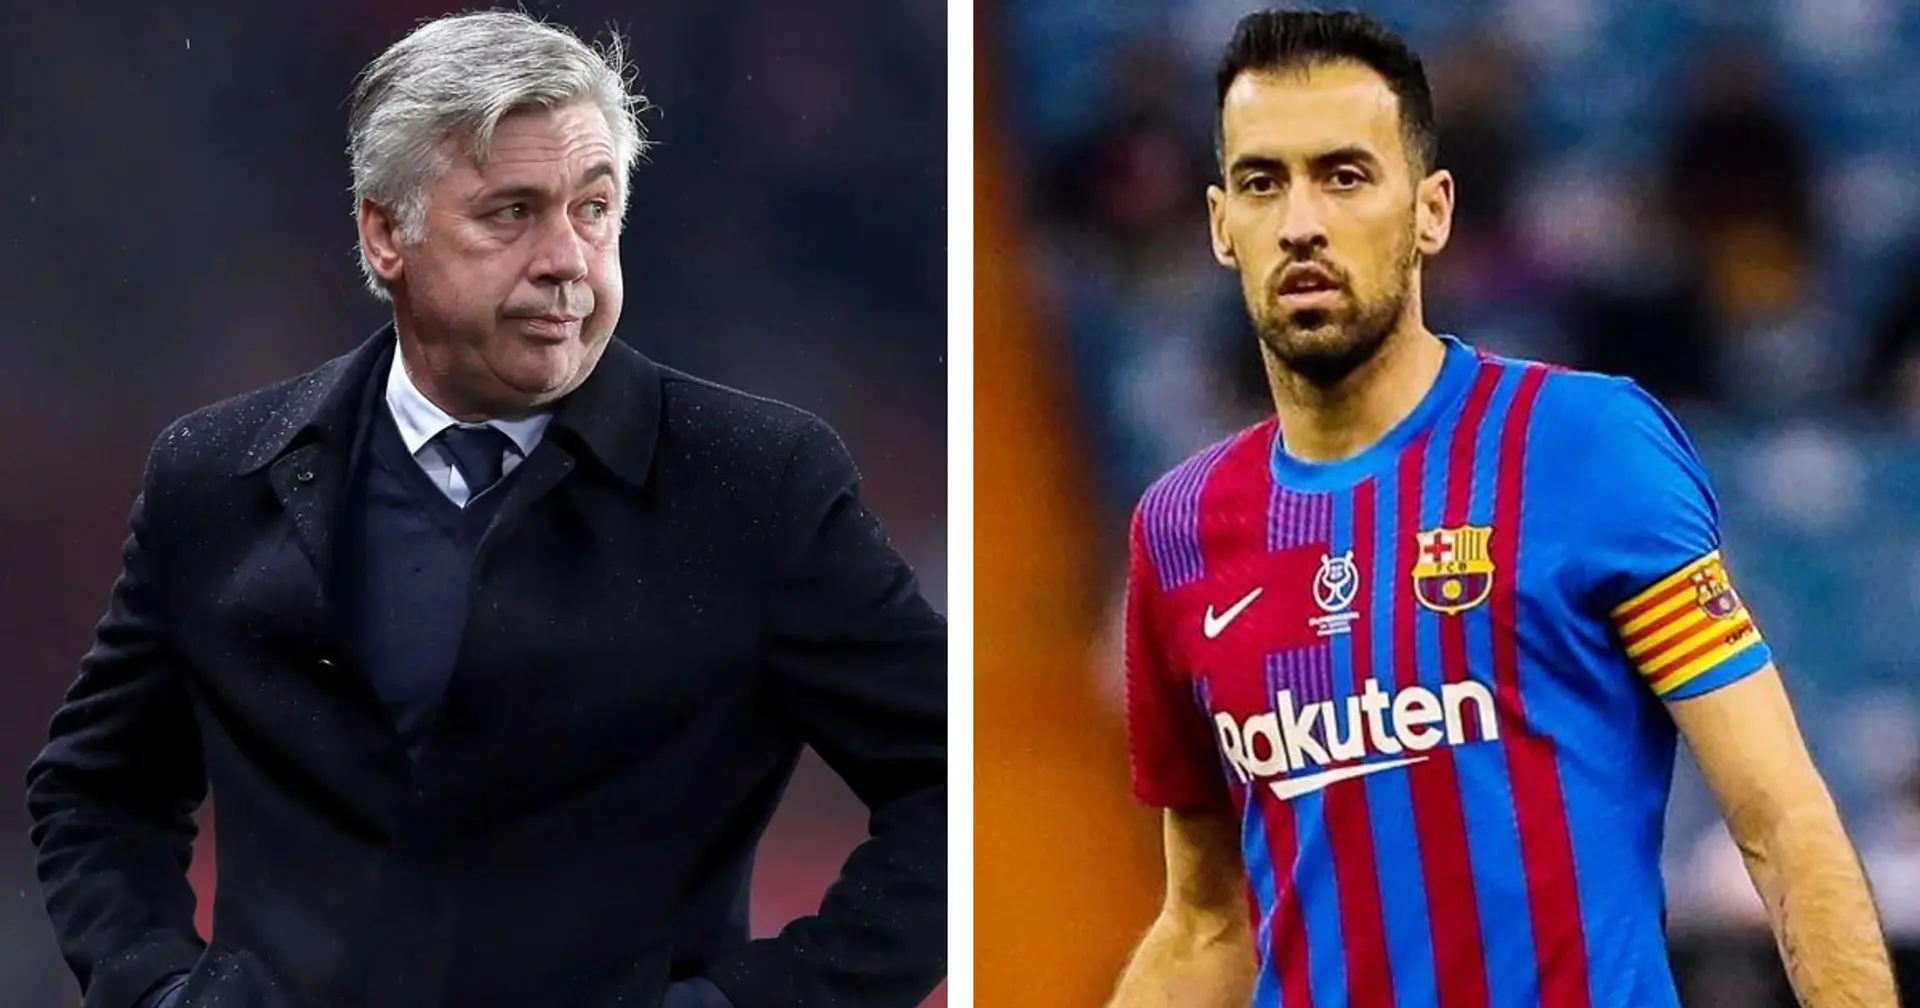 Ancelotti pinpoints Barca's 'weakness' which Real Madrid took advantage of in El Clasico win